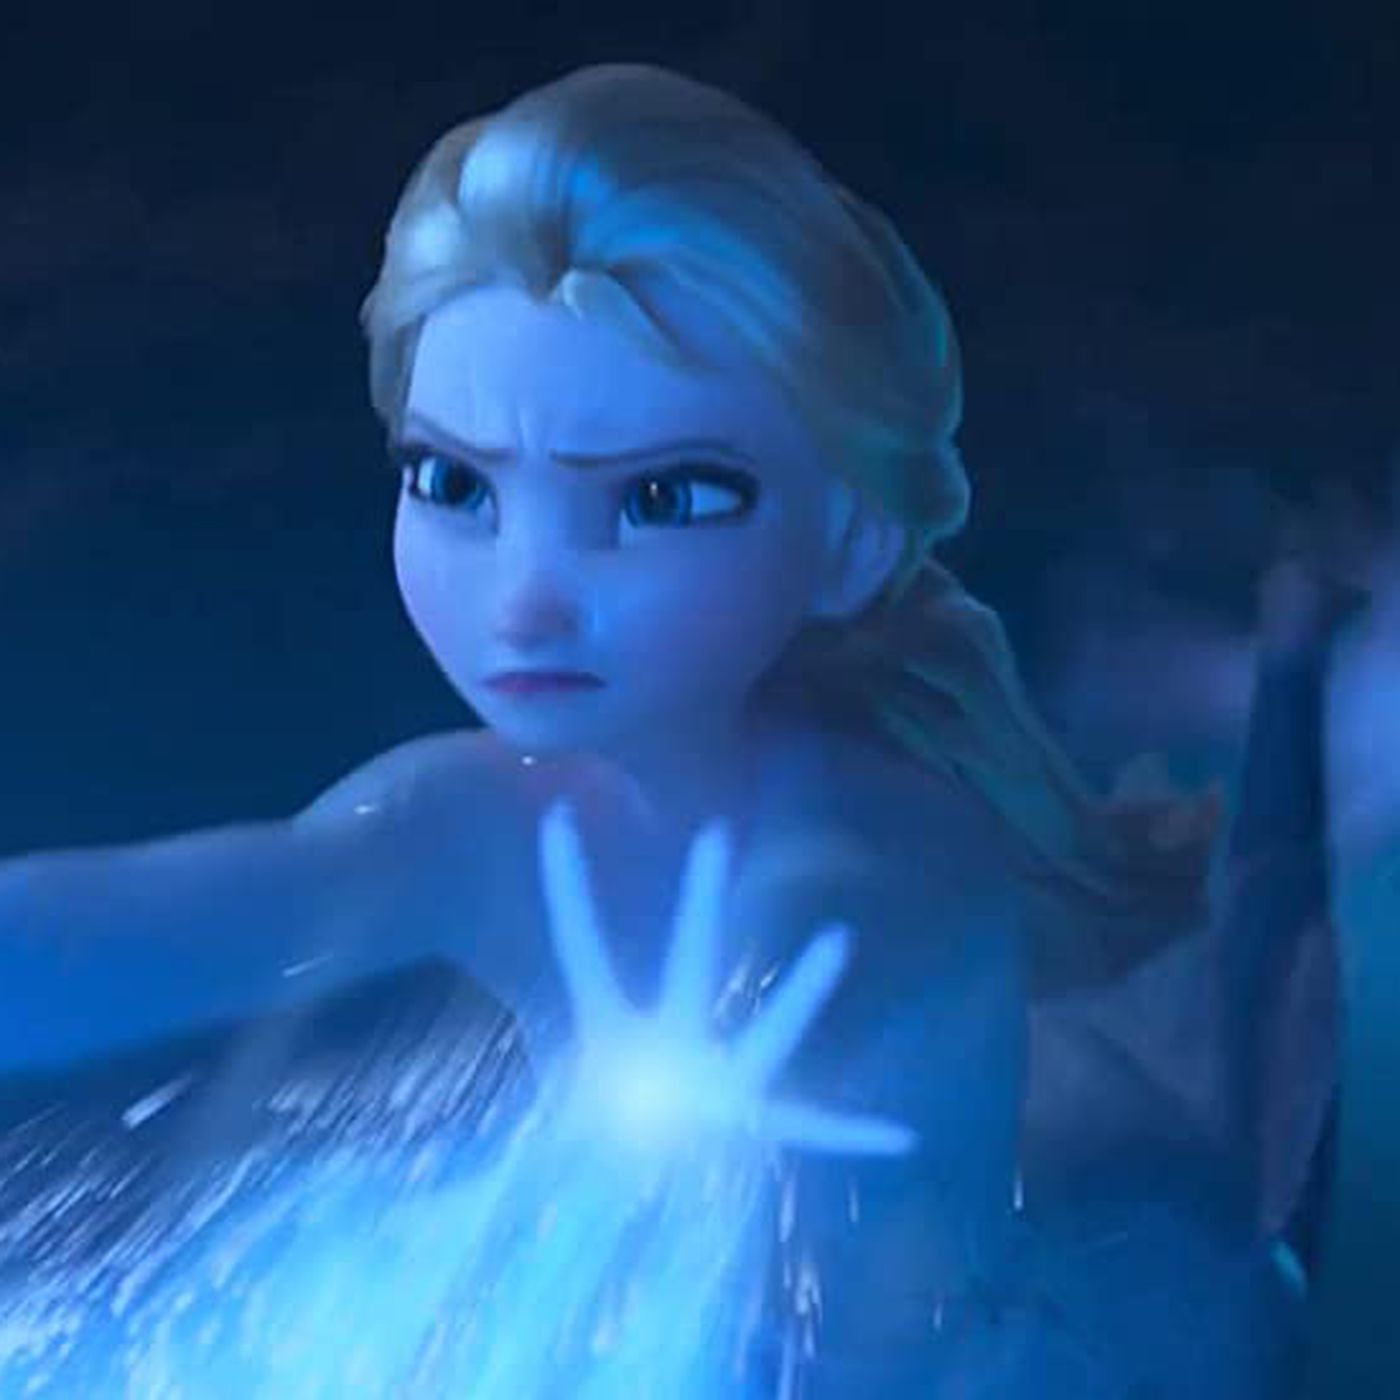 Who wants a process of creating theatre which looks like Elsa’s been on the rampage? Really avoid that feeling of having to get it right. Pic shows Elsa from Disney’s Frozen using her powers.